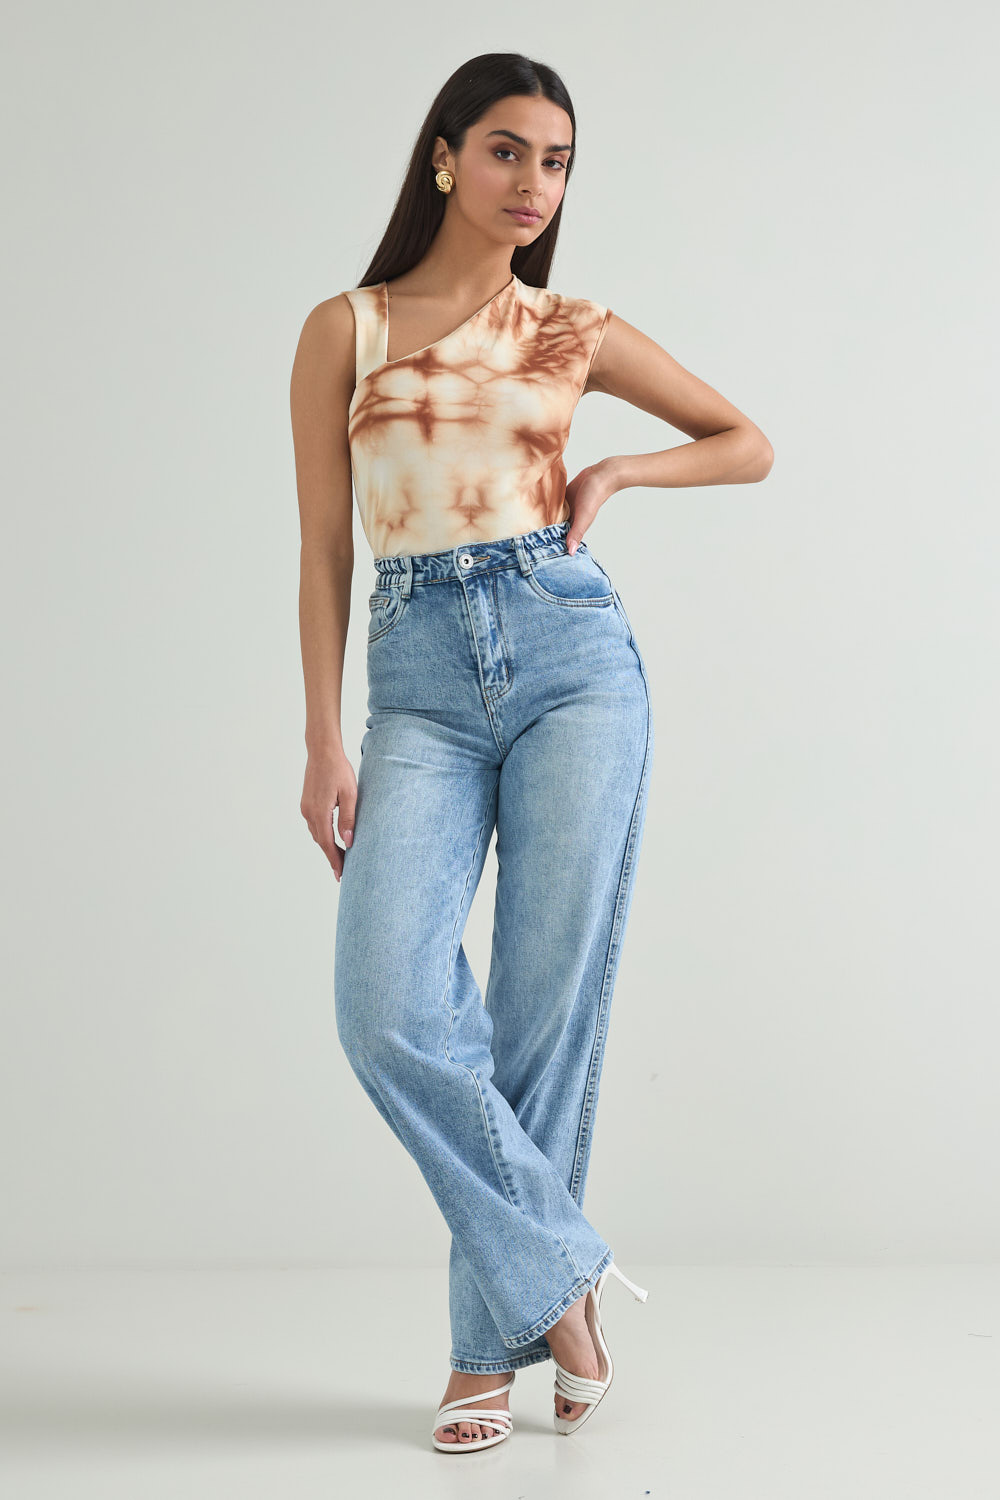 Picture of Denim pants with waistband